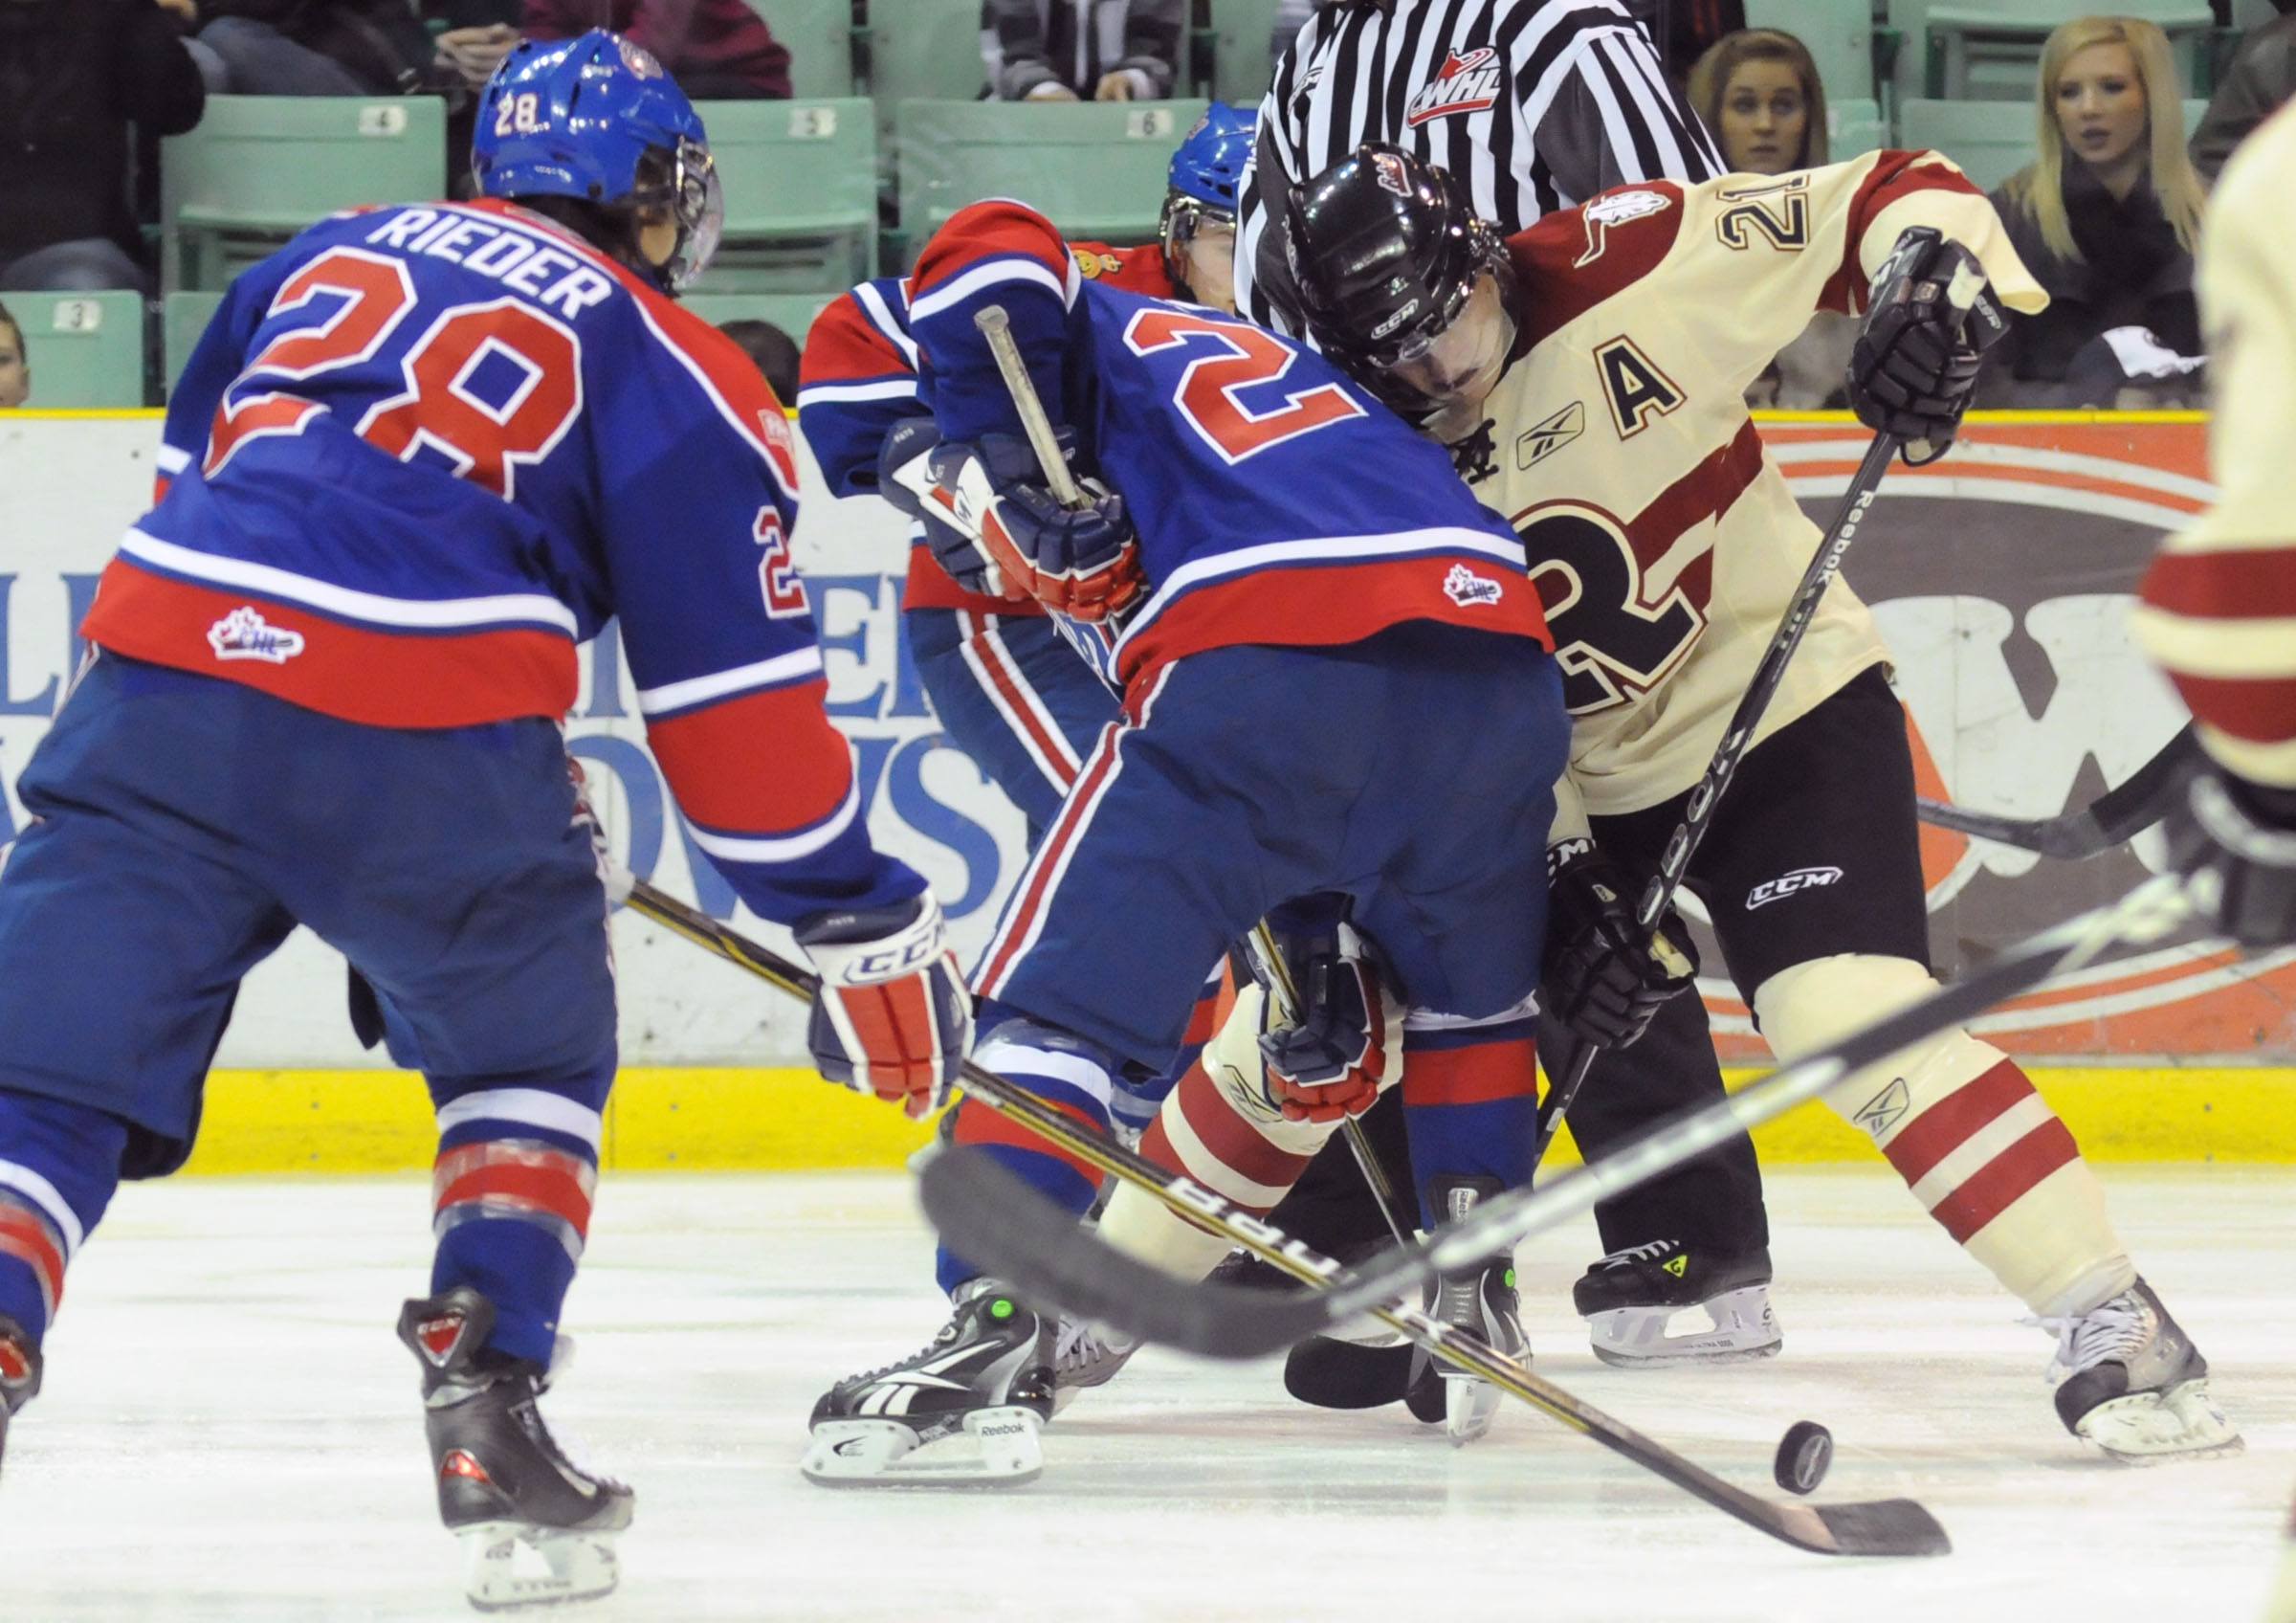 SCRAMBLE- Red Deer Rebel Byron Froese fights for the puck during Friday nights WHL action against the Regina Pats. The Rebels lost 2-1.